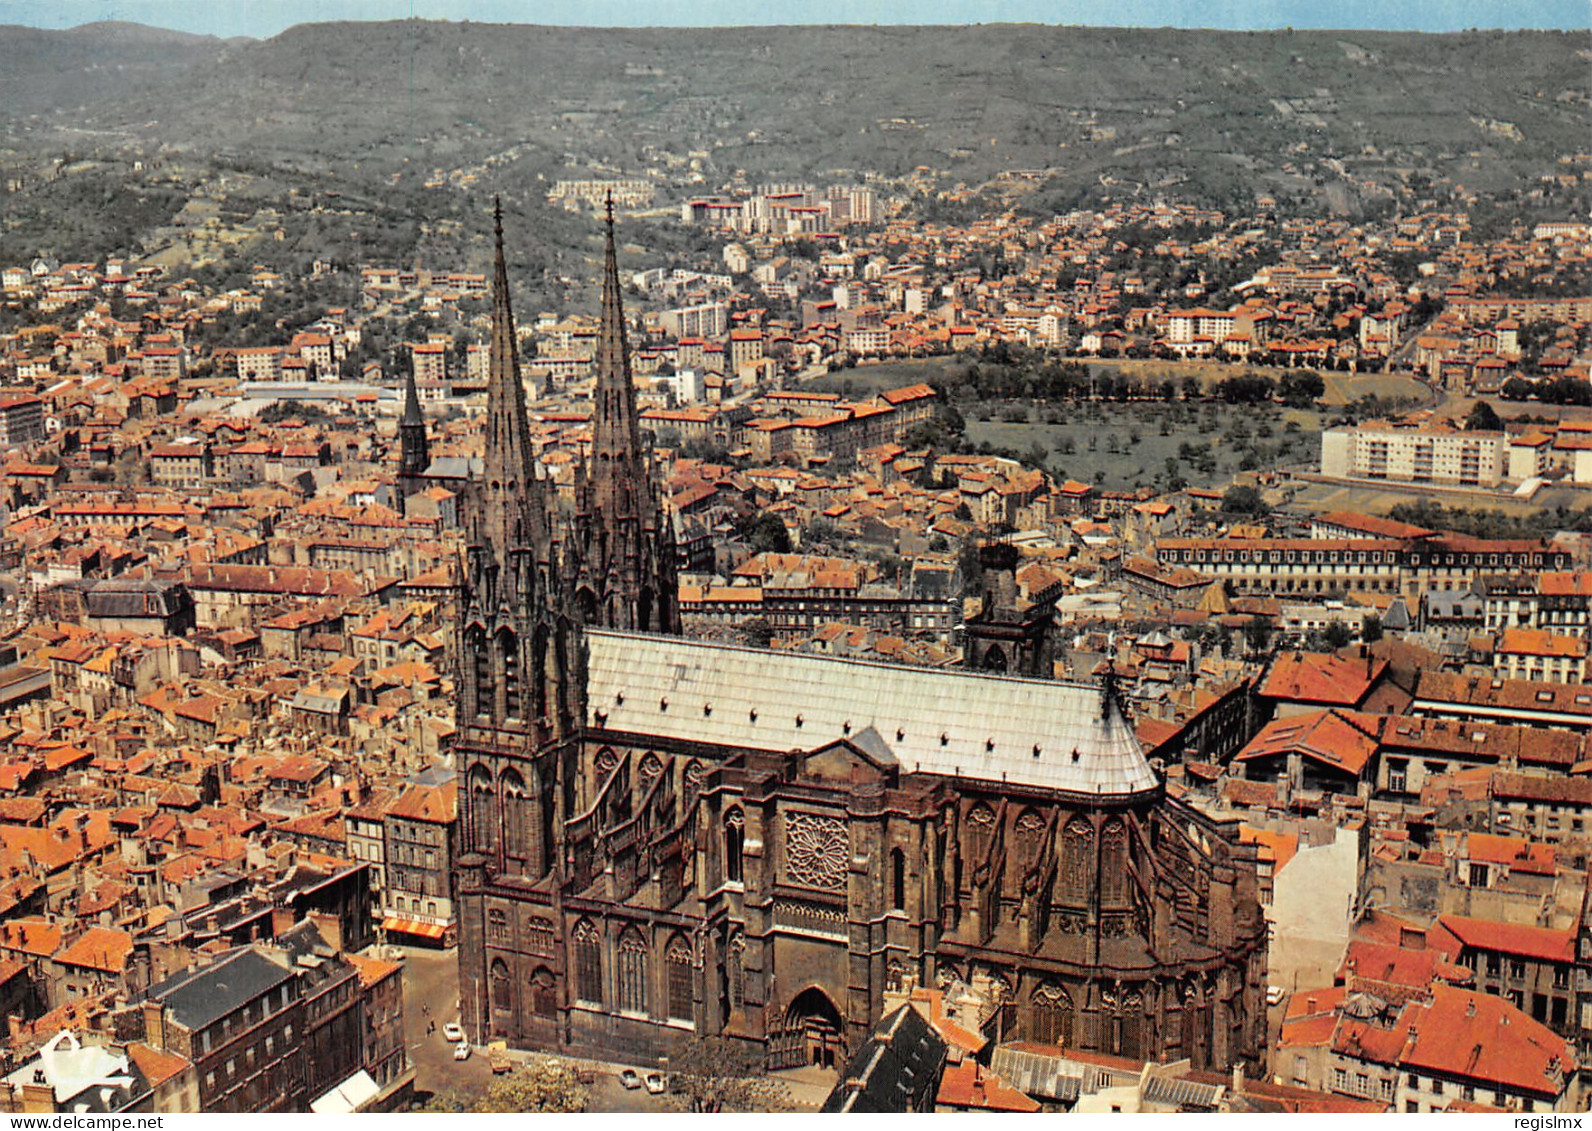 63-CLERMONT FERRAND-N°T1063-A/0283 - Clermont Ferrand